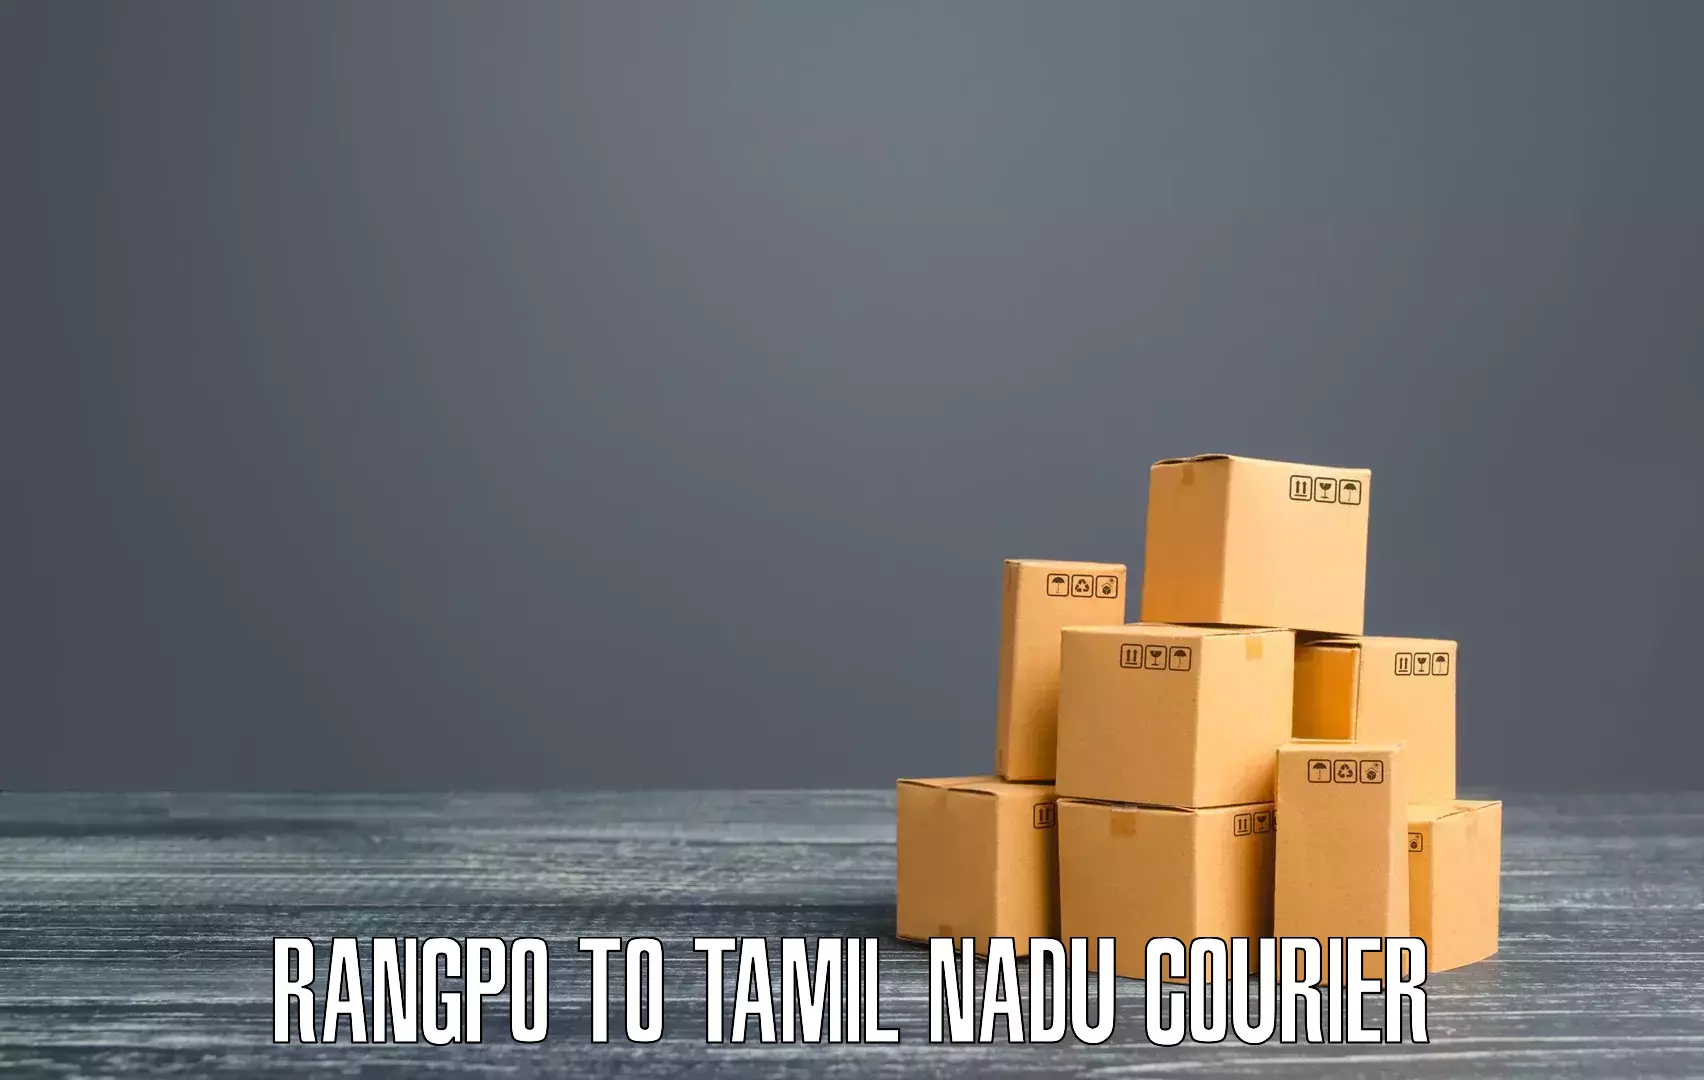 Online shipping calculator in Rangpo to Tamil Nadu